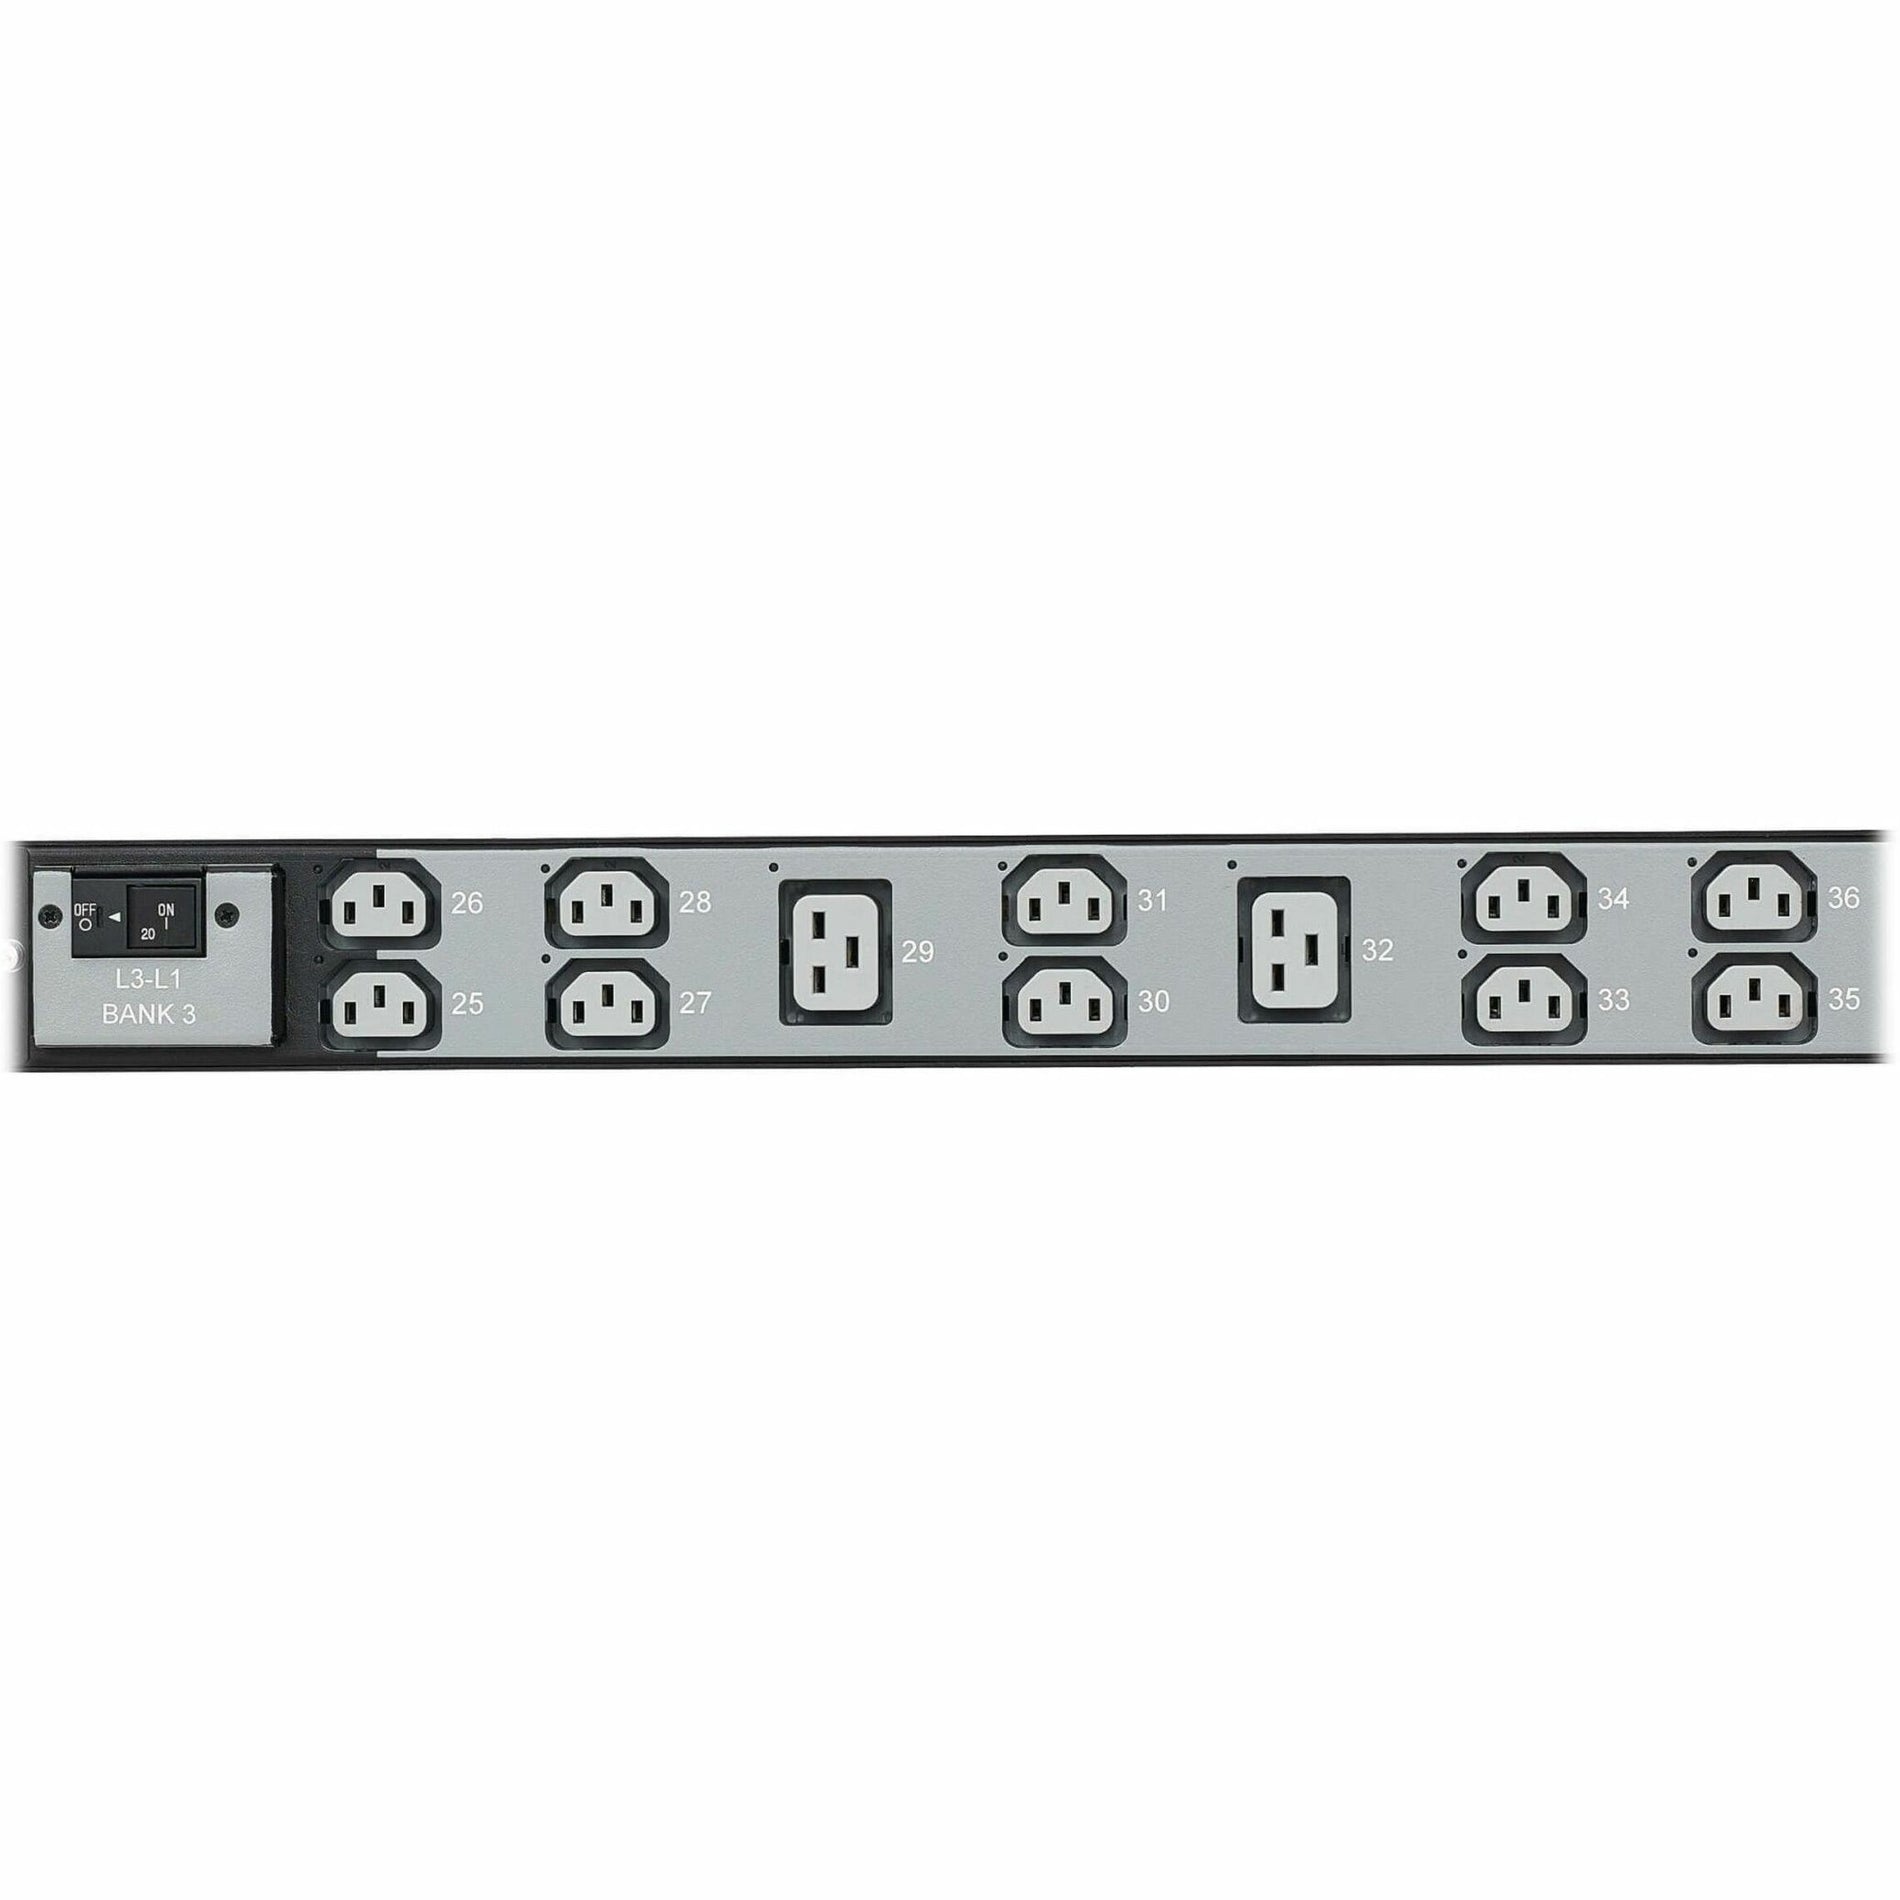 Tripp Lite PDU3EVSR1G60 36-Outlets PDU, 12.60 kW Power Rating, Managed, Switched, Overload Protection